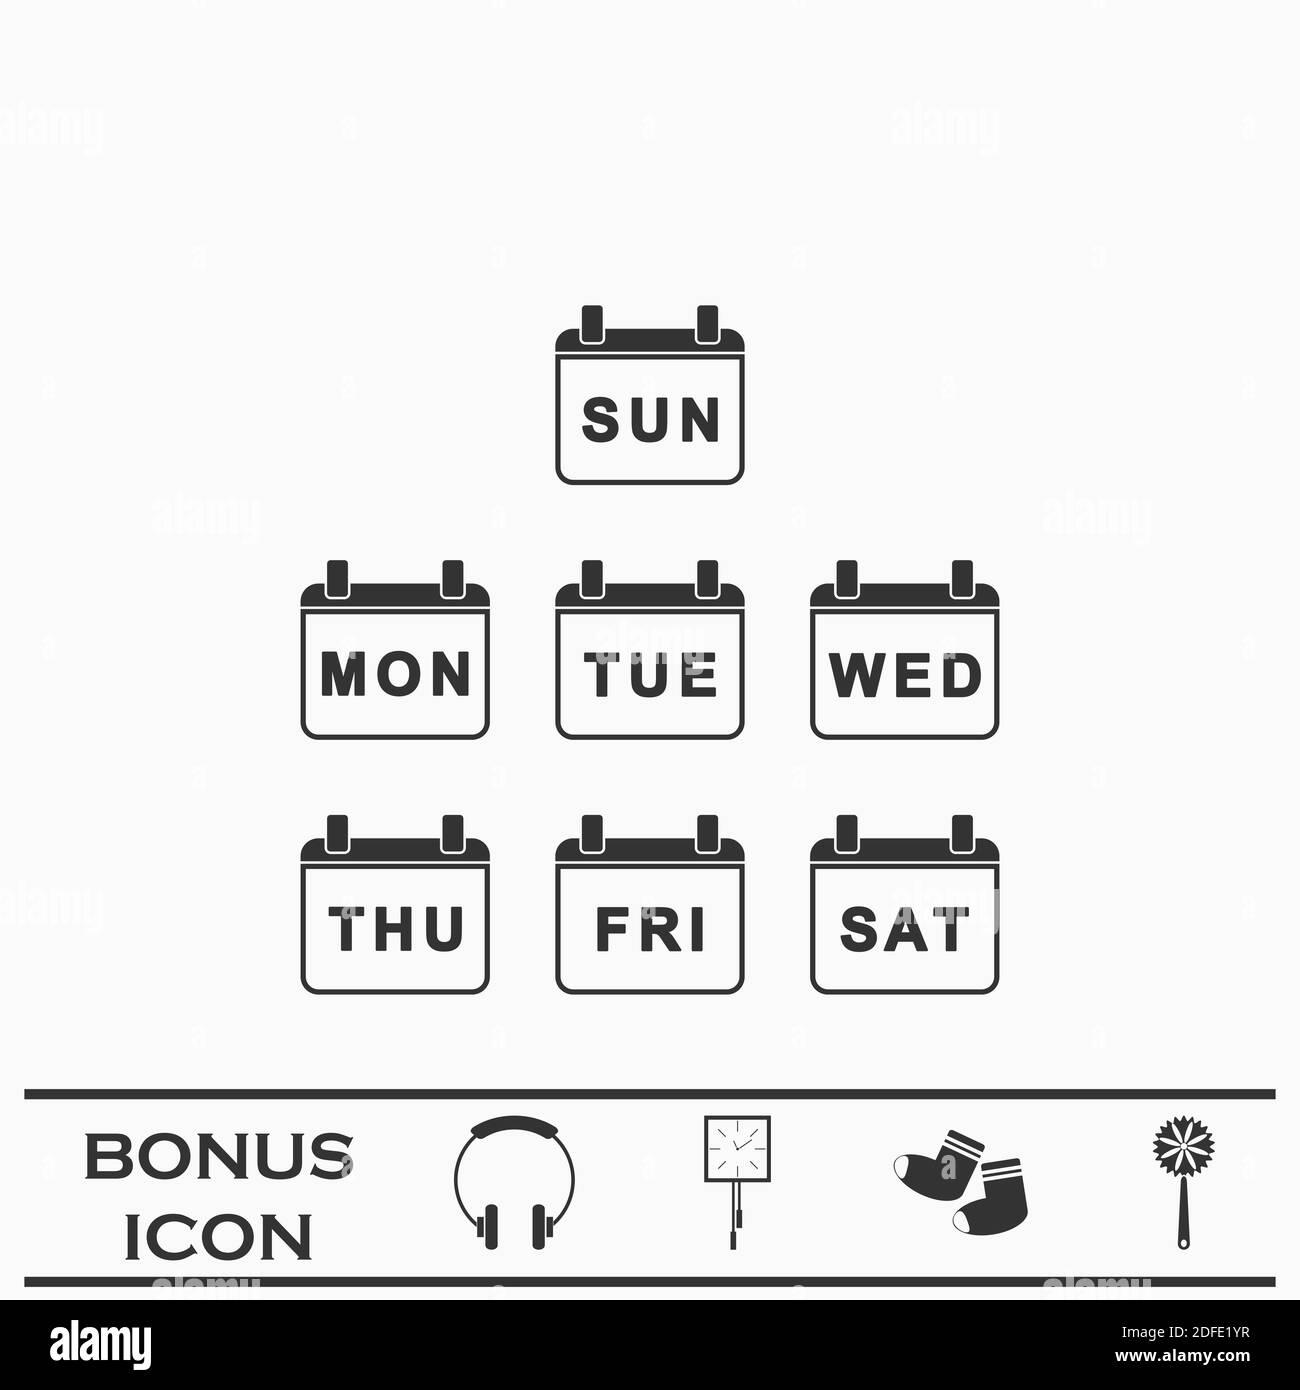 Every Day Week Calendar icon flat. Black pictogram on white background. Vector illustration symbol and bonus button Stock Vector